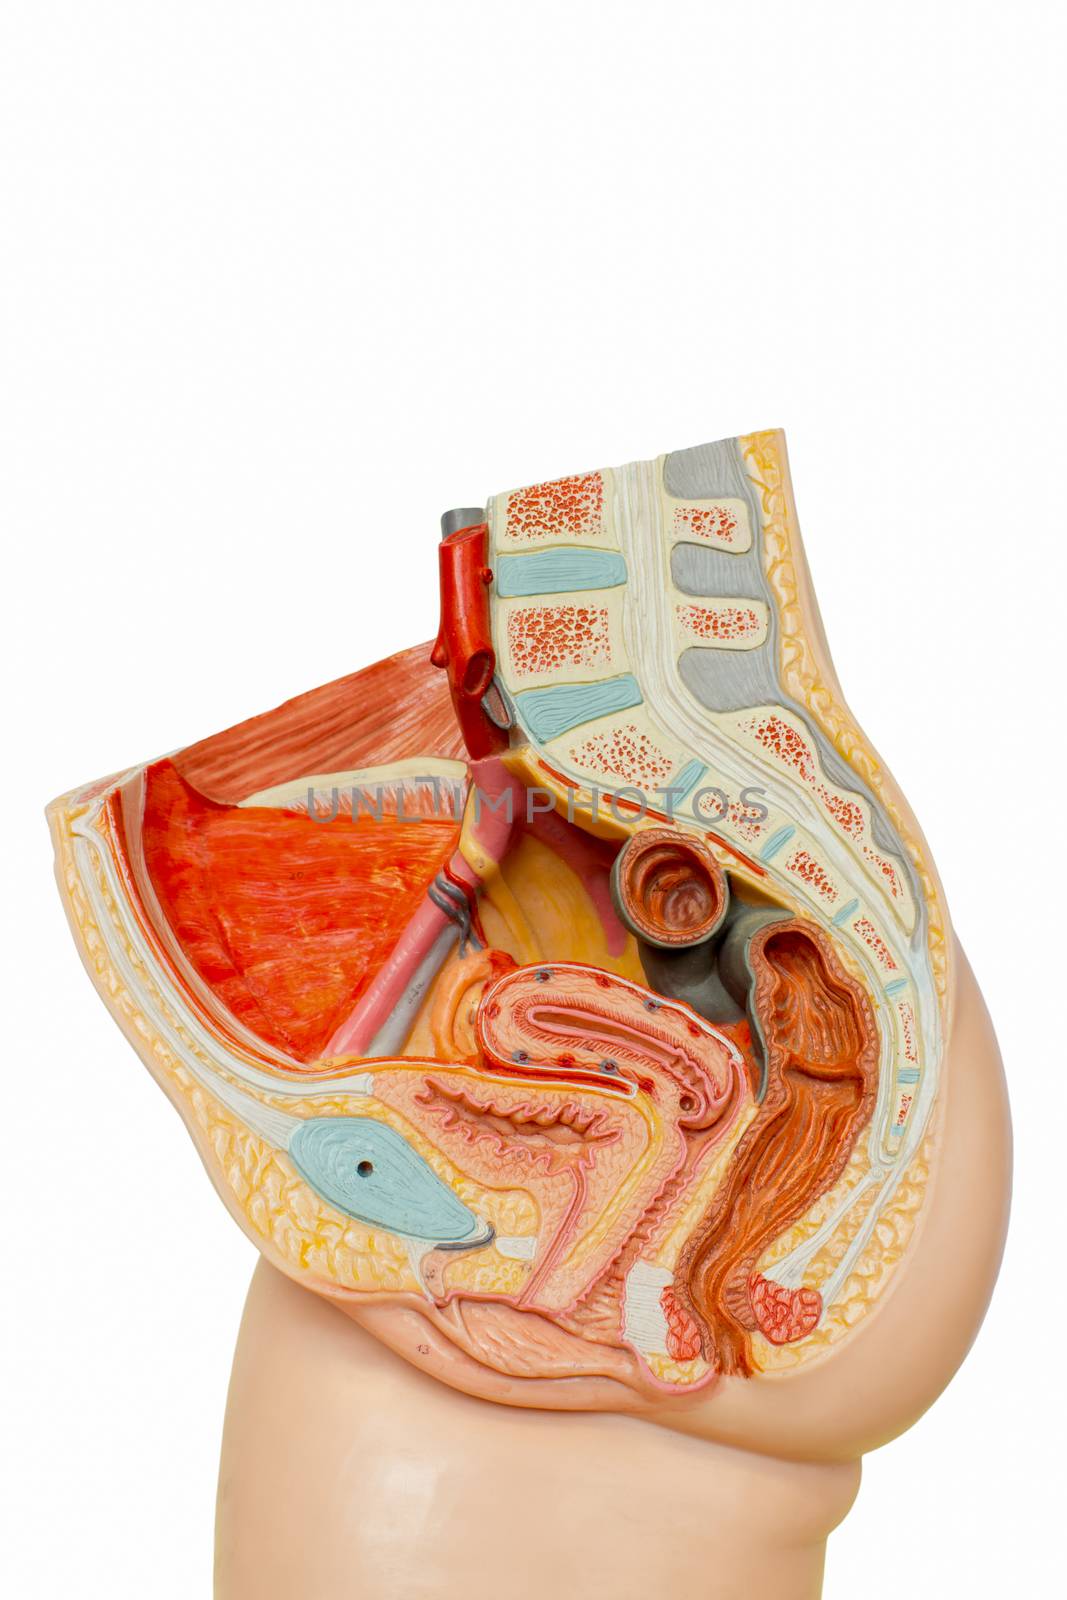 Model human female reproduction organs by BenSchonewille